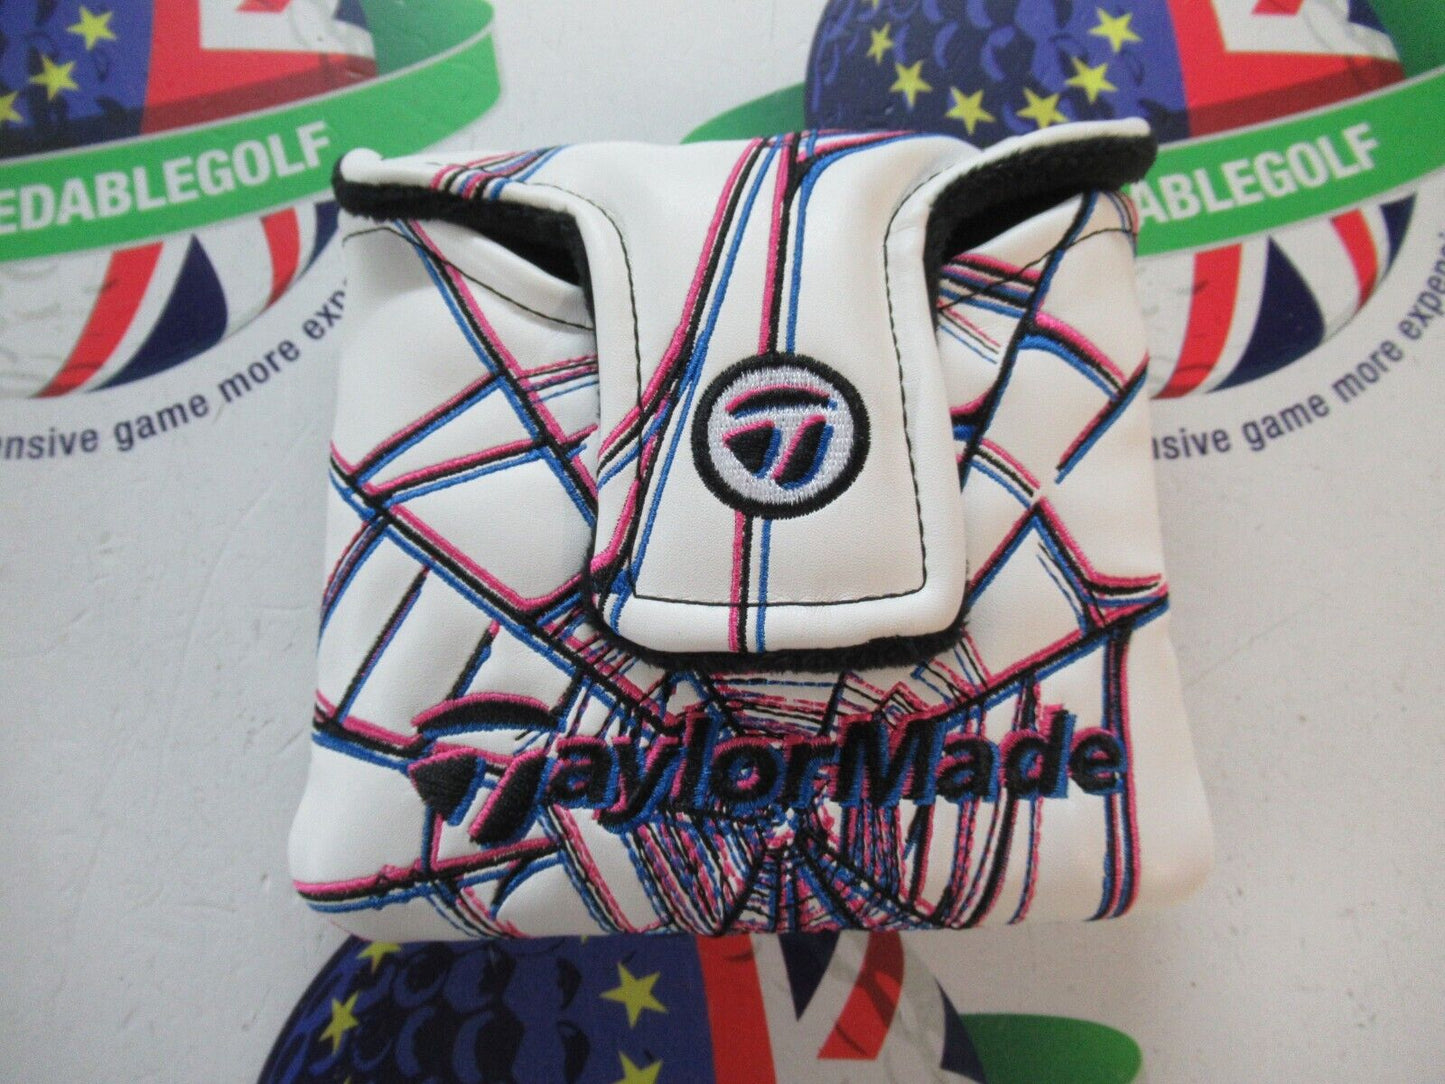 new taylormade vault limited edition venom trip mallet putter head cover